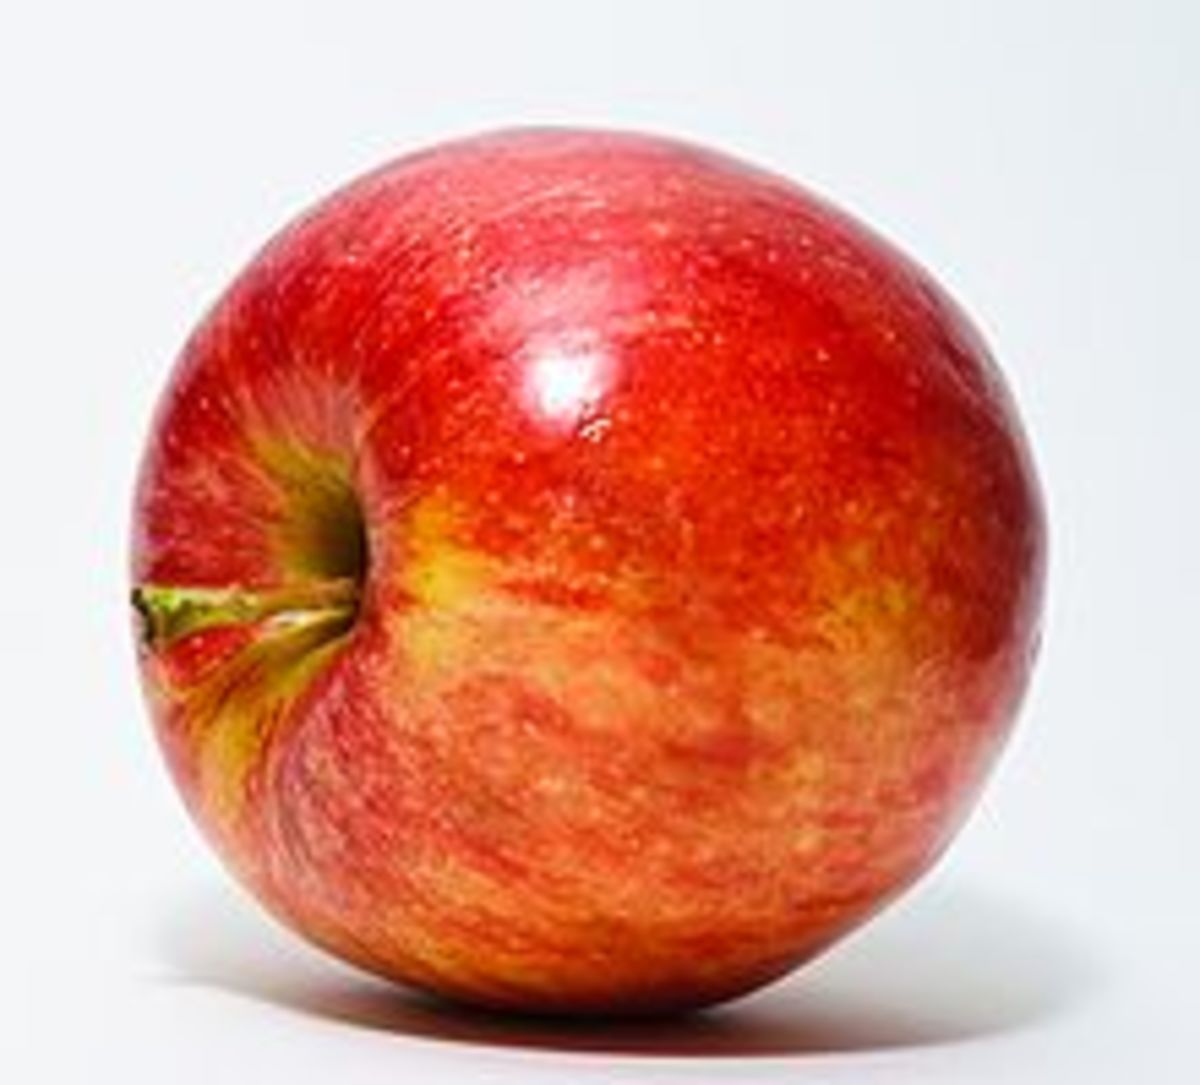 An Apple looks like this. 